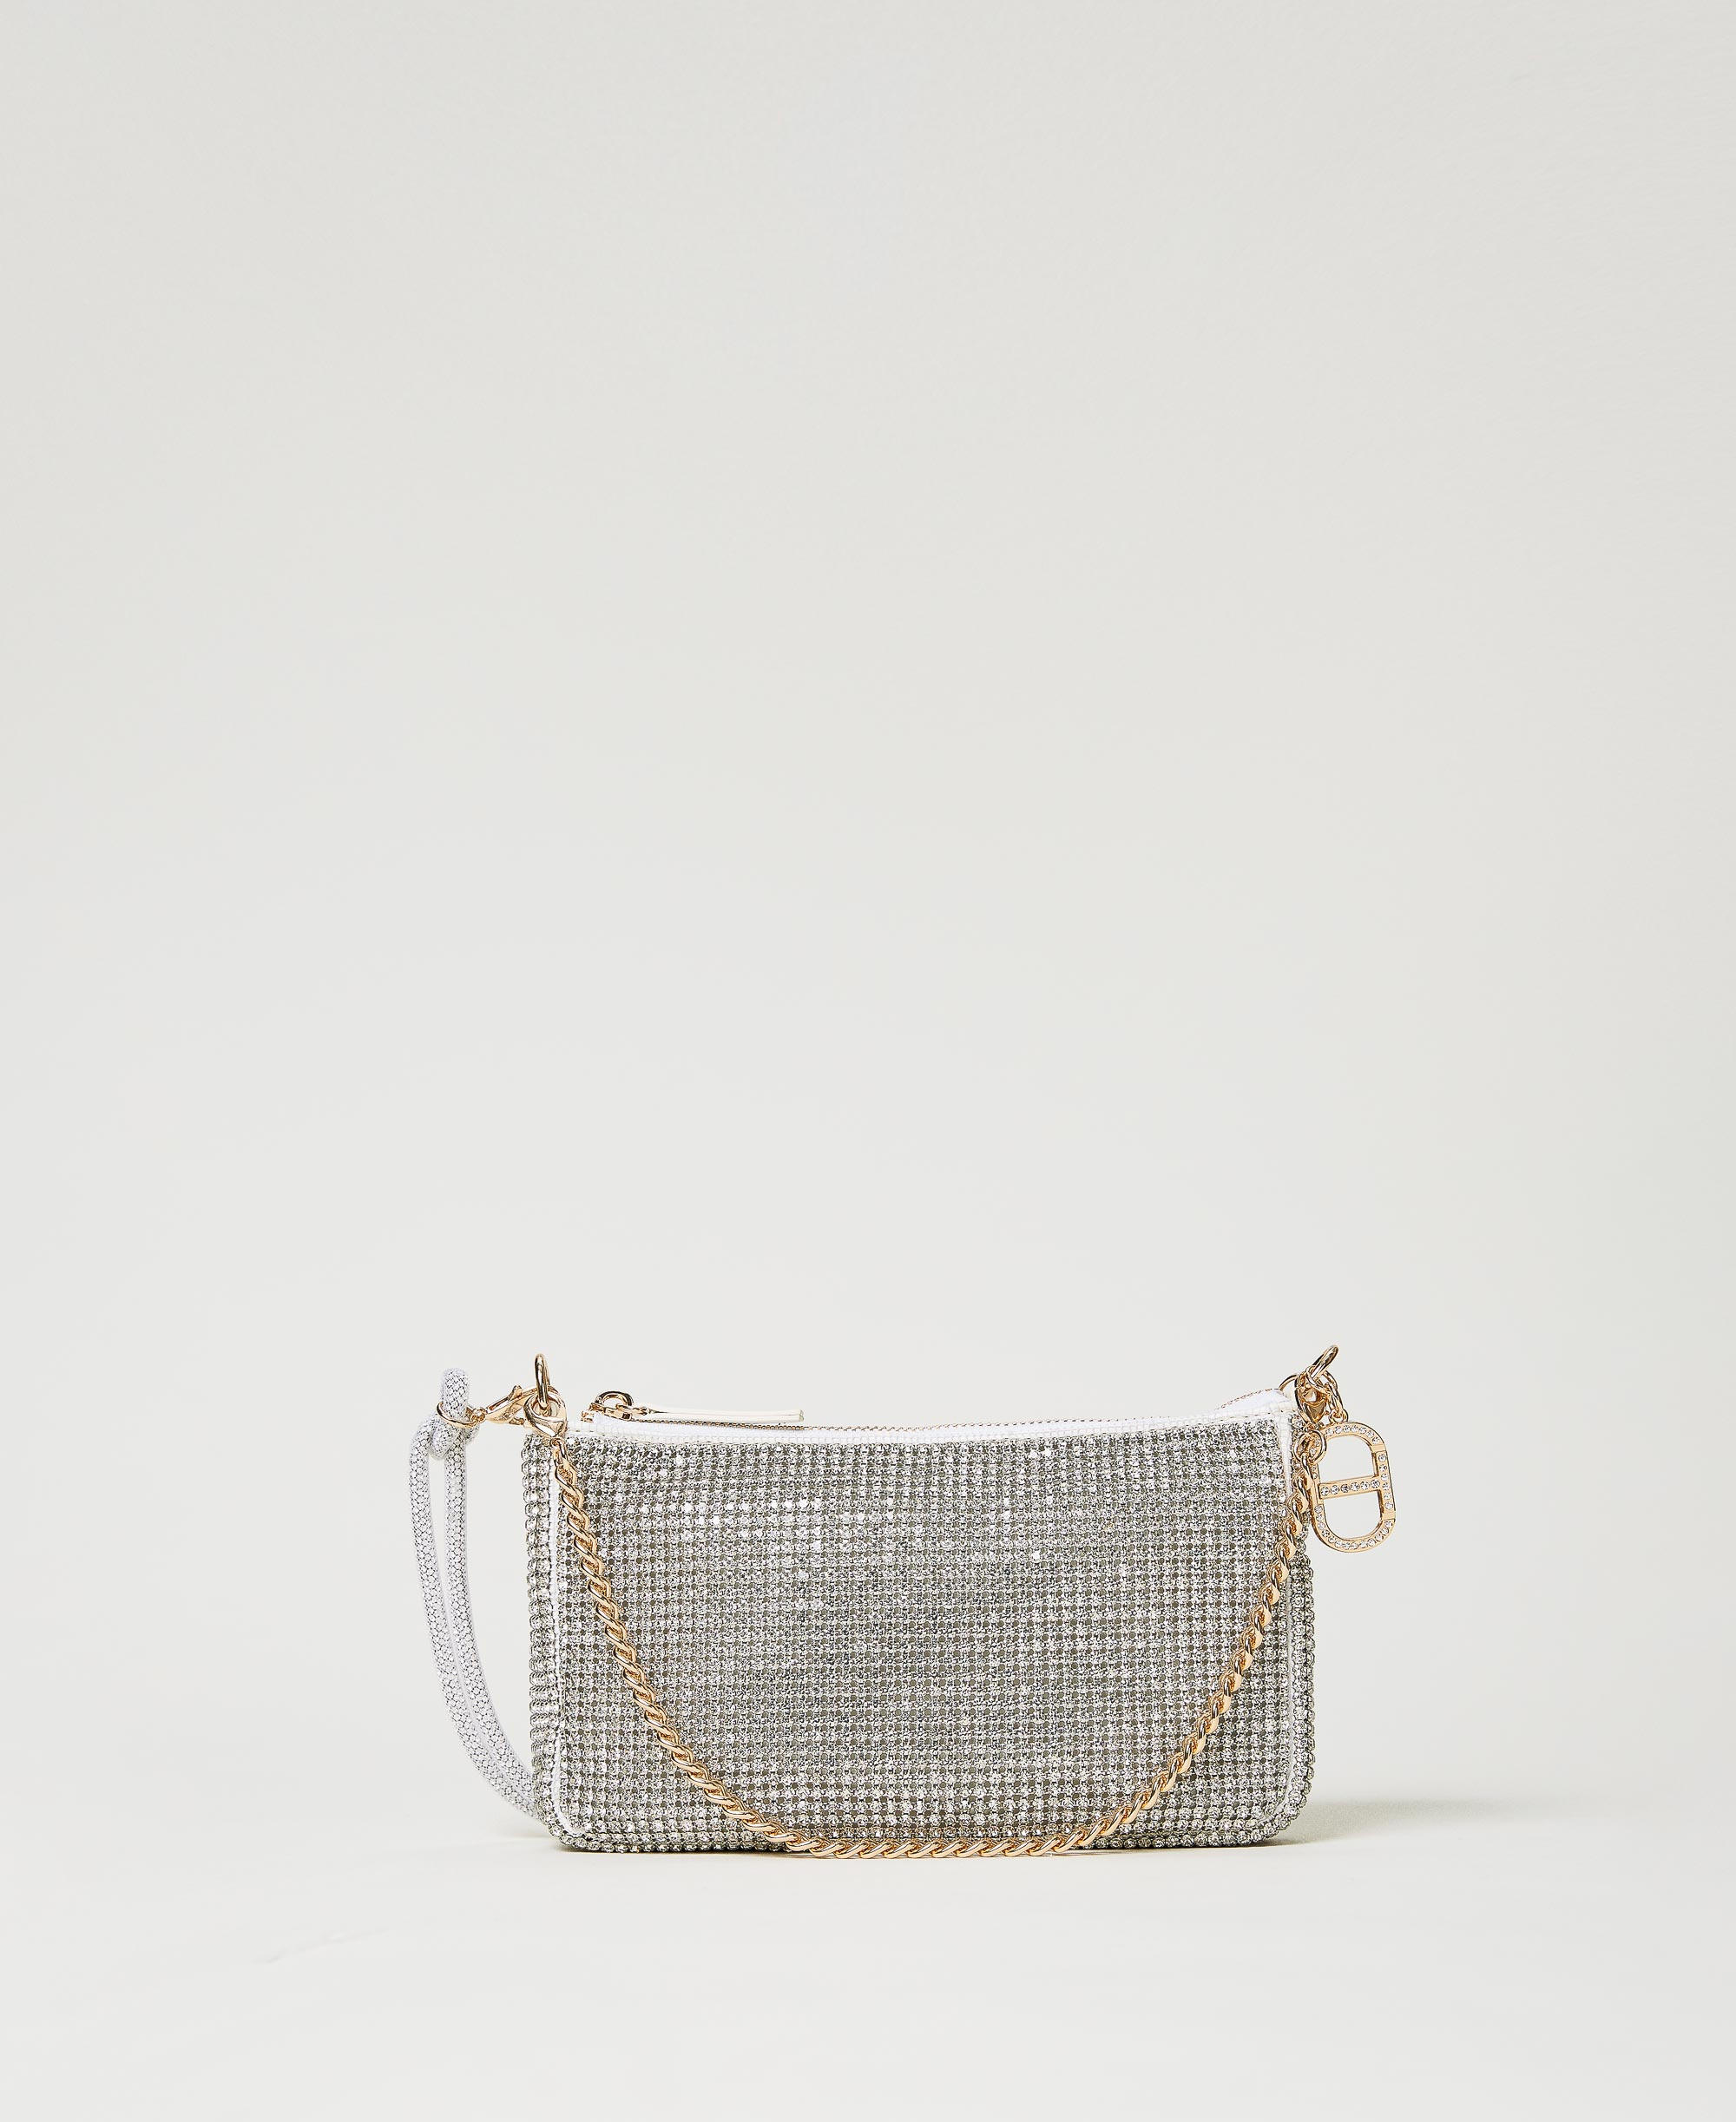 'Petite' jewel shoulder bag with rhinestones and charms